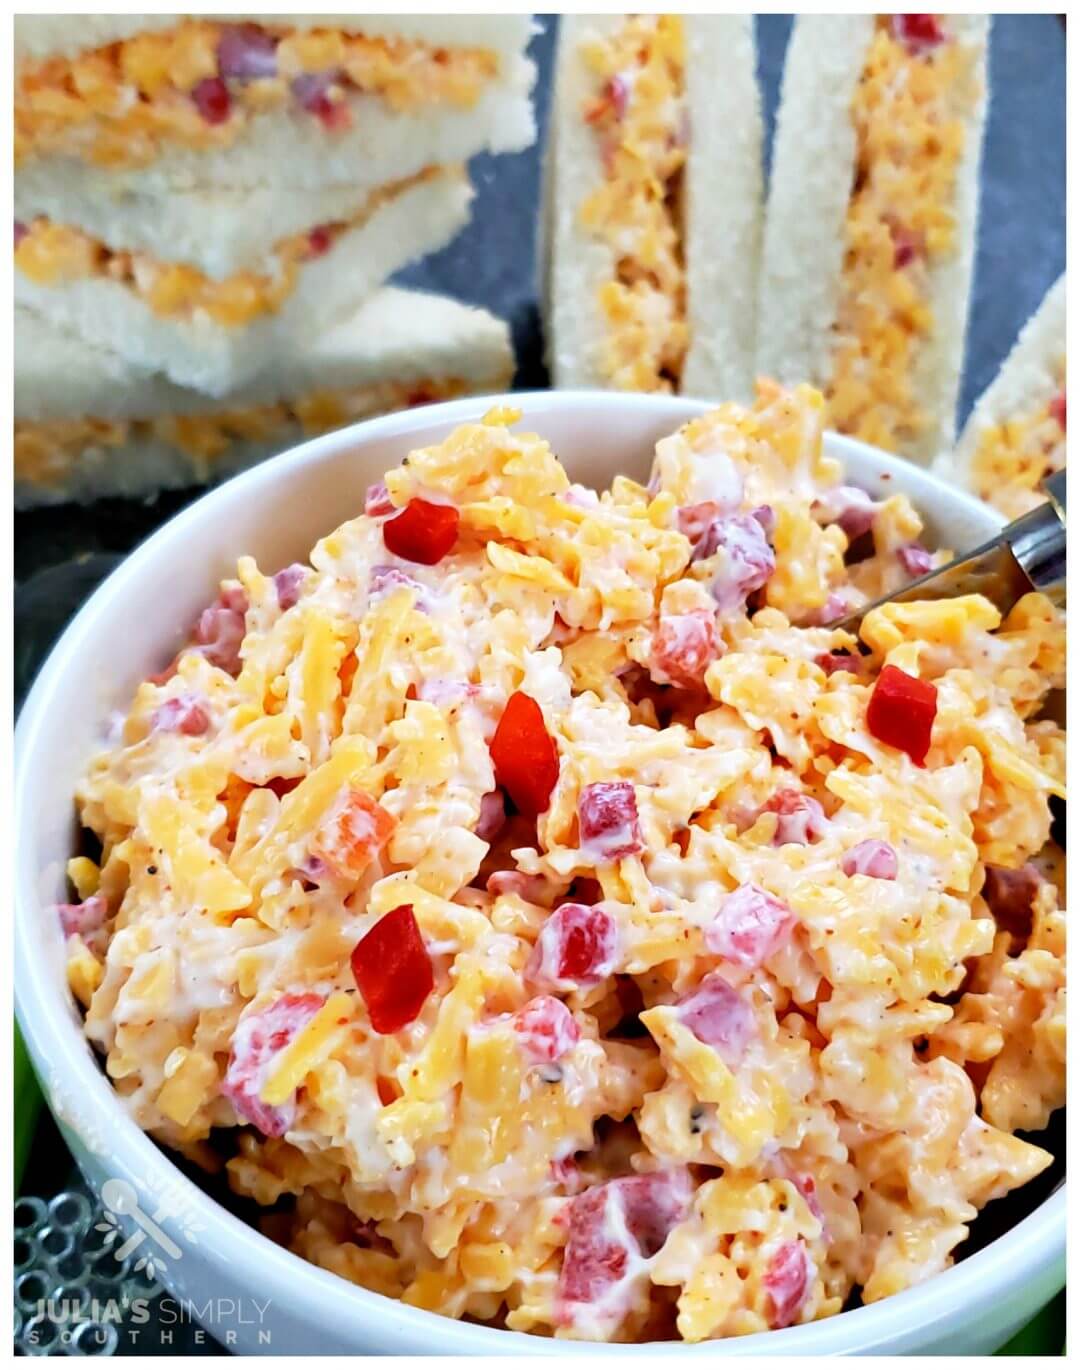 Classic Southern Pimento Cheese Recipe - Julias Simply Southern